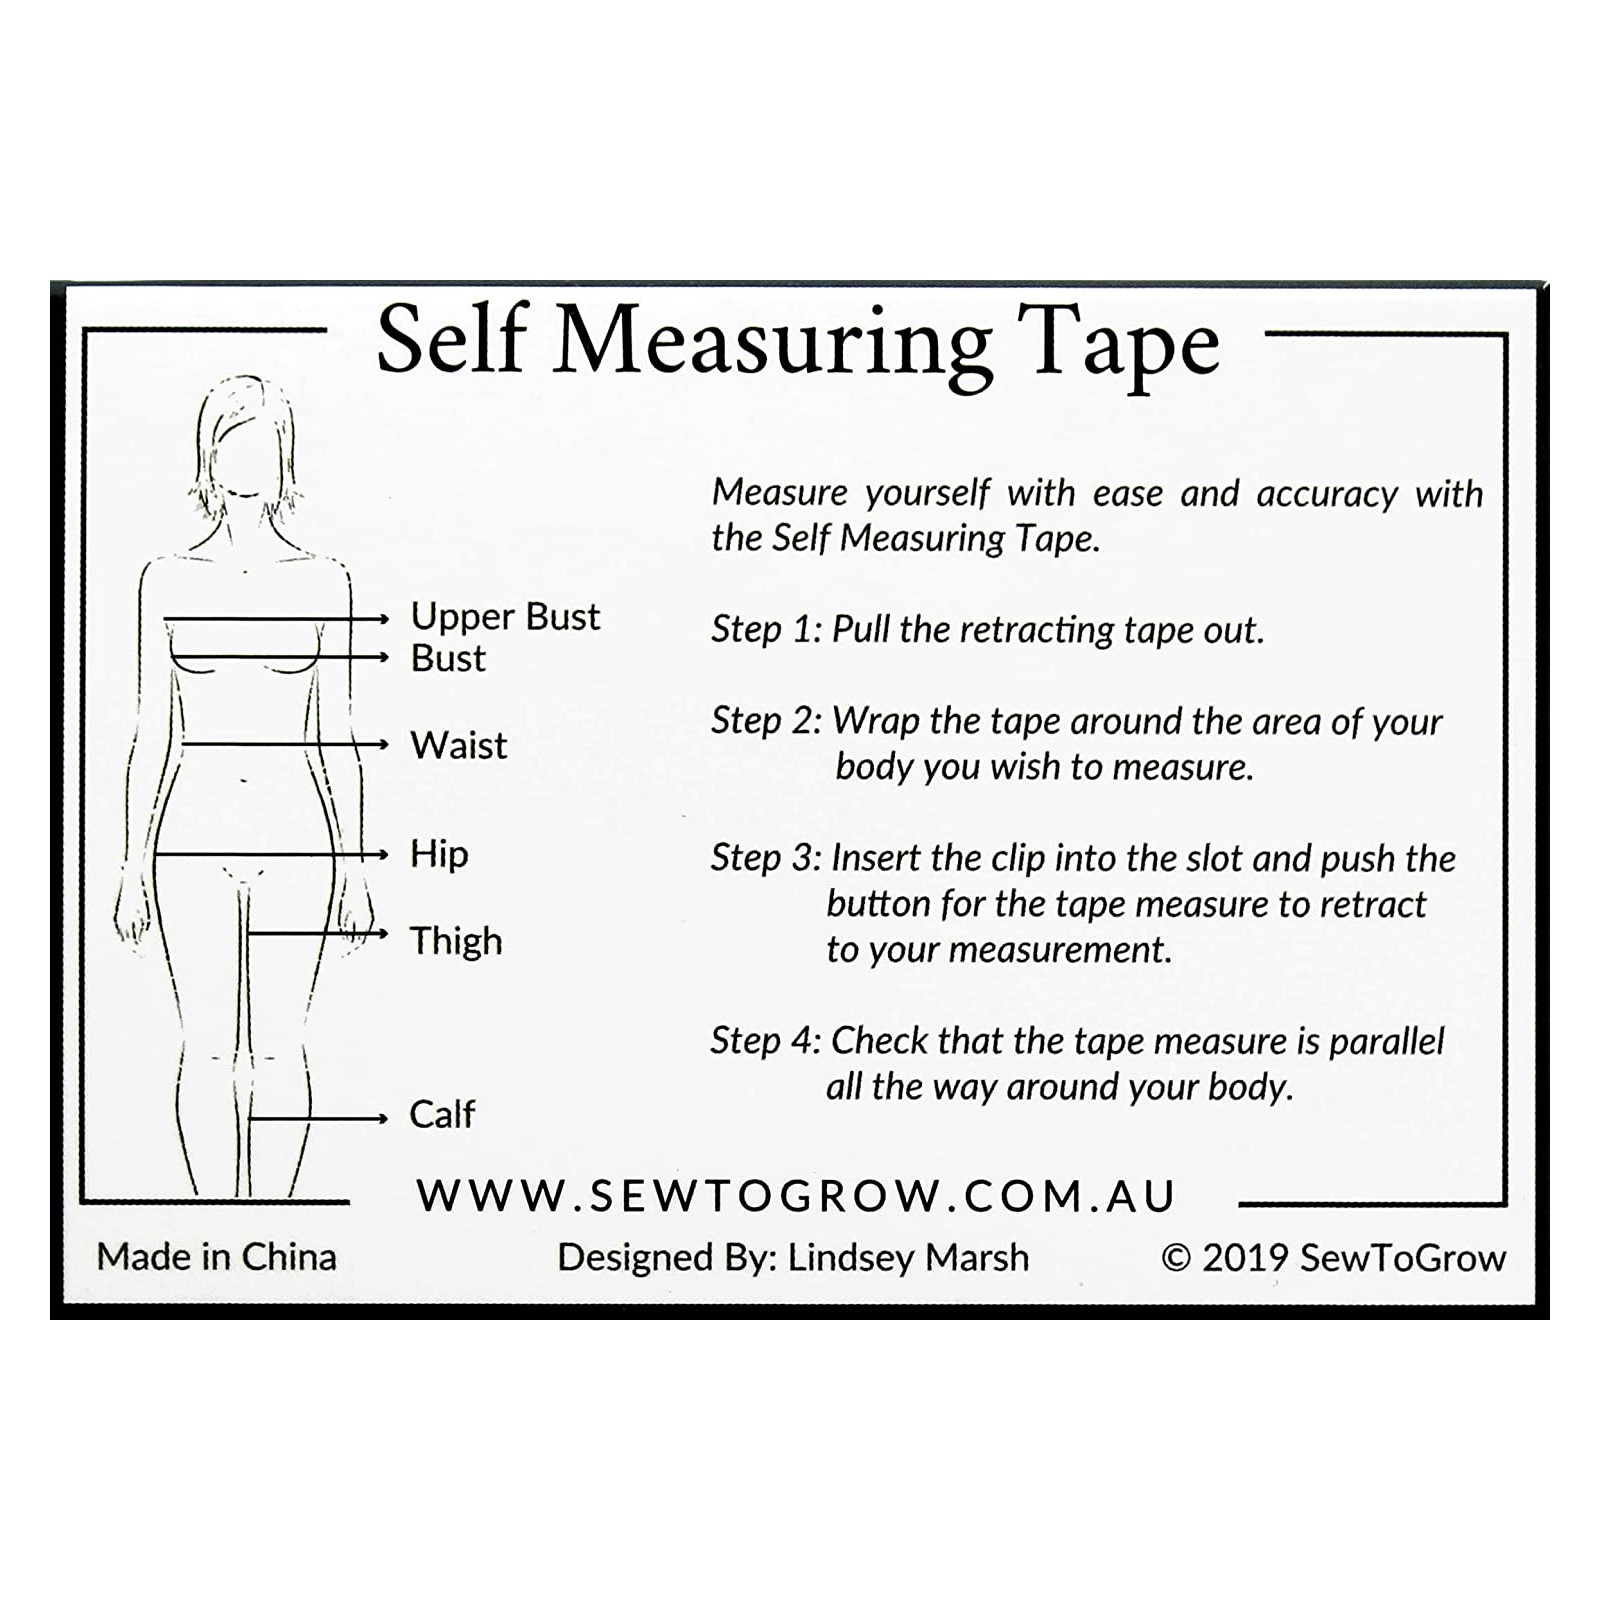 https://goodfabric.co.uk/wp-content/uploads/2023/01/good-fabric-sew-to-grow-self-measuring-tape-guide.jpg